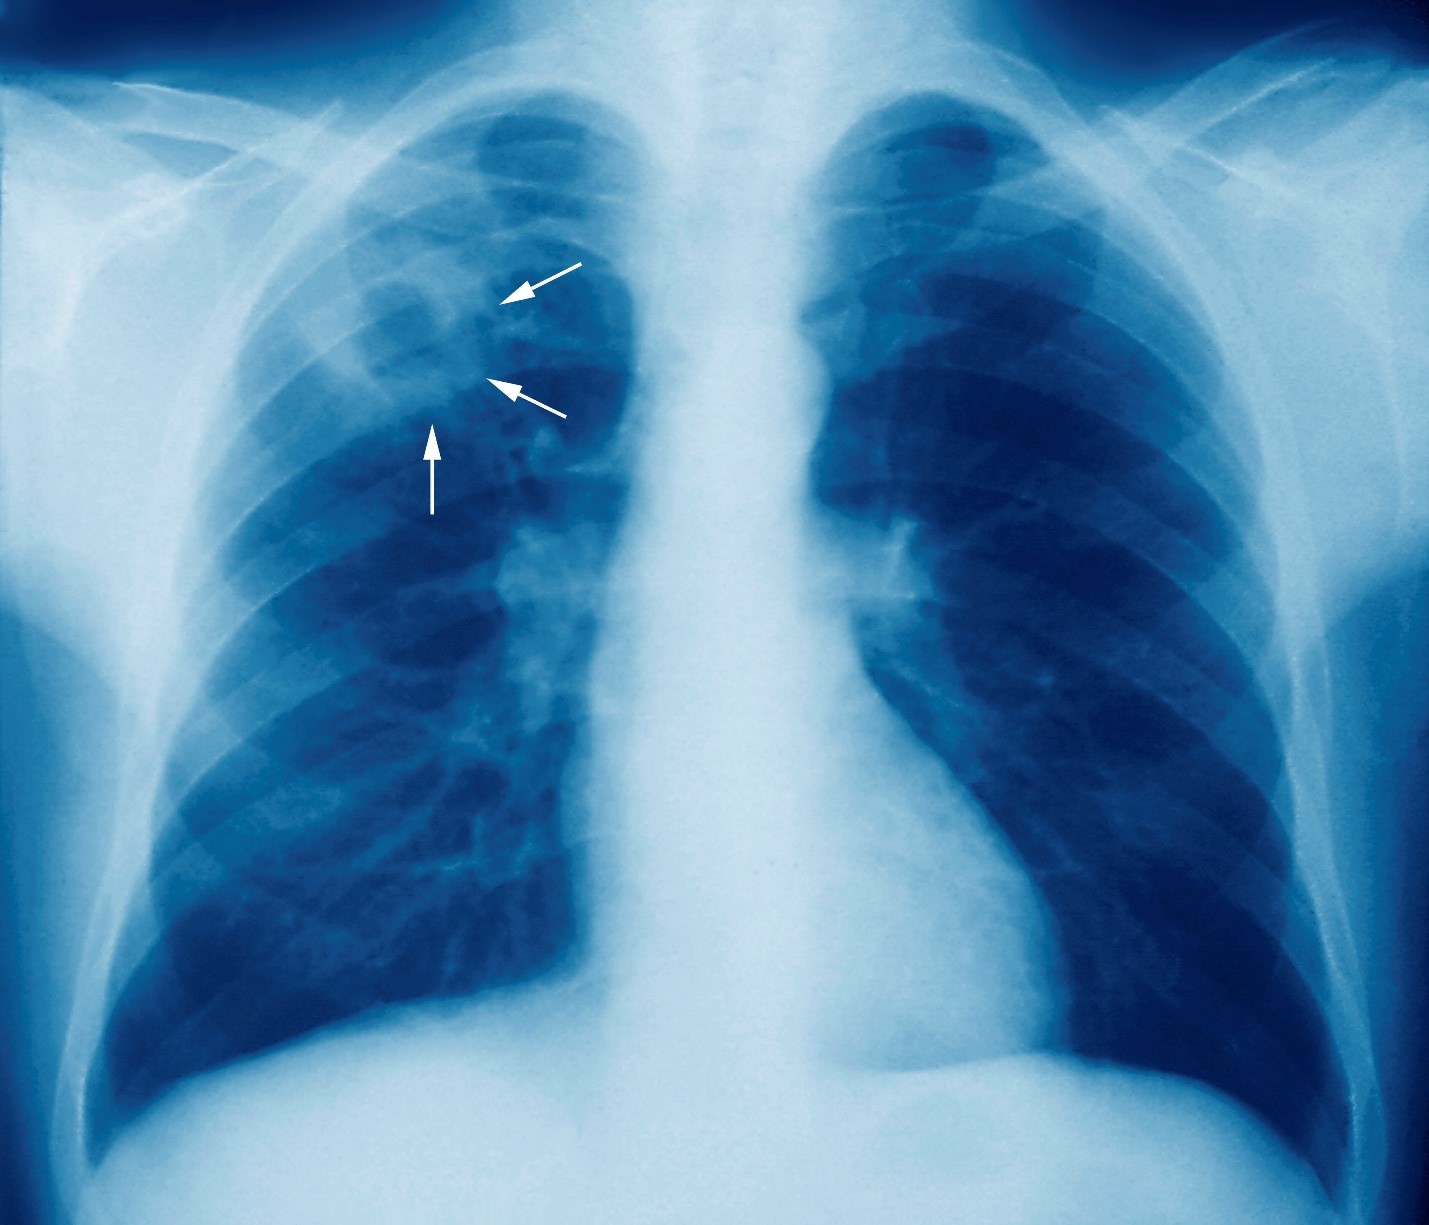 https://www.msdmanuals.com/-/media/manual/professional/images/m/2/7/m2700245-tuberculosis-chest-x-ray-science-photo-library-high_vi.jpg?thn=0&sc_lang=vi